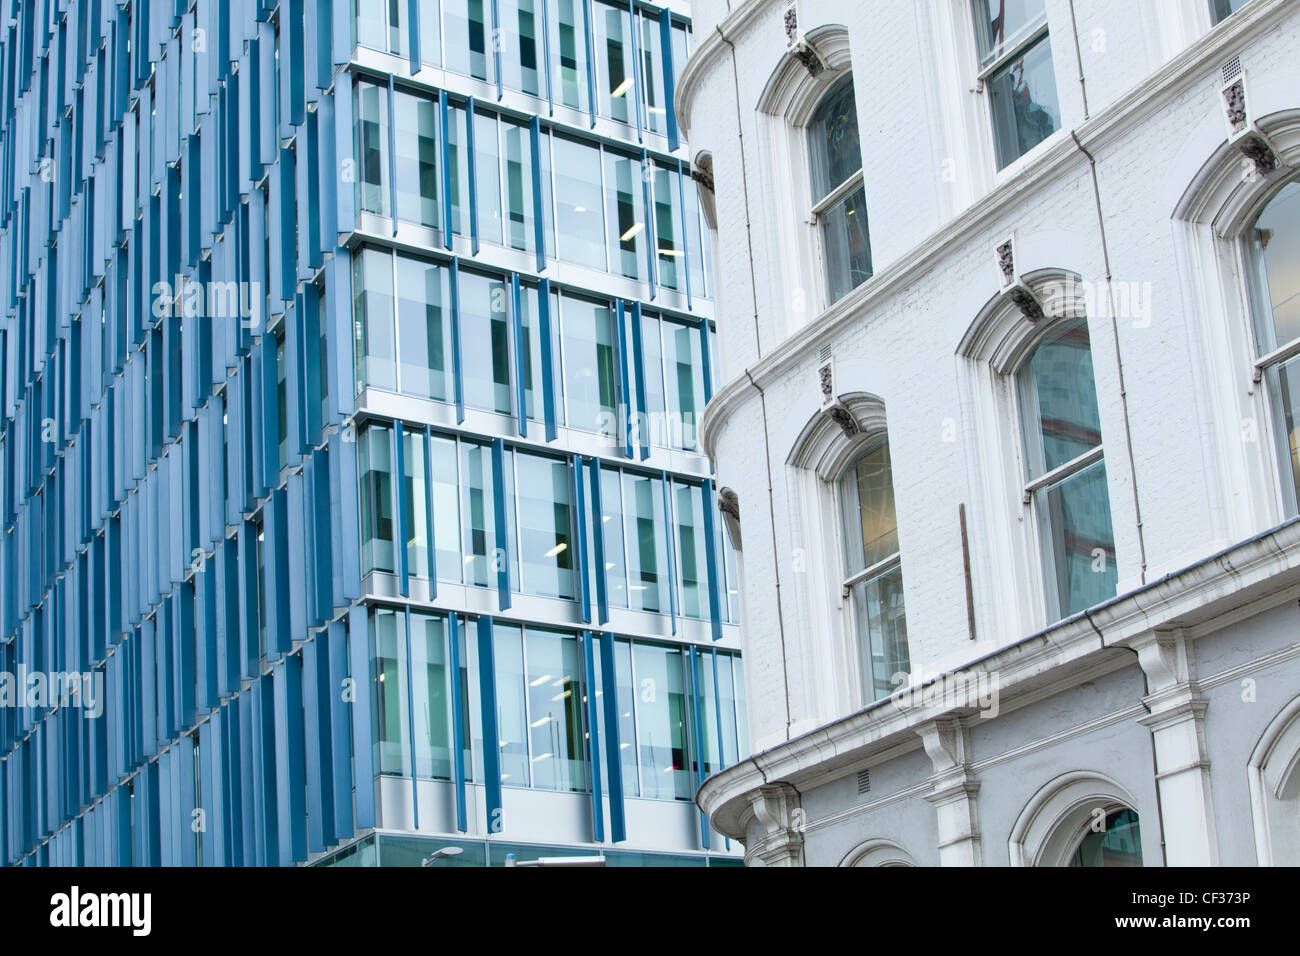 A view of the Blue Fin building in London. Stock Photo